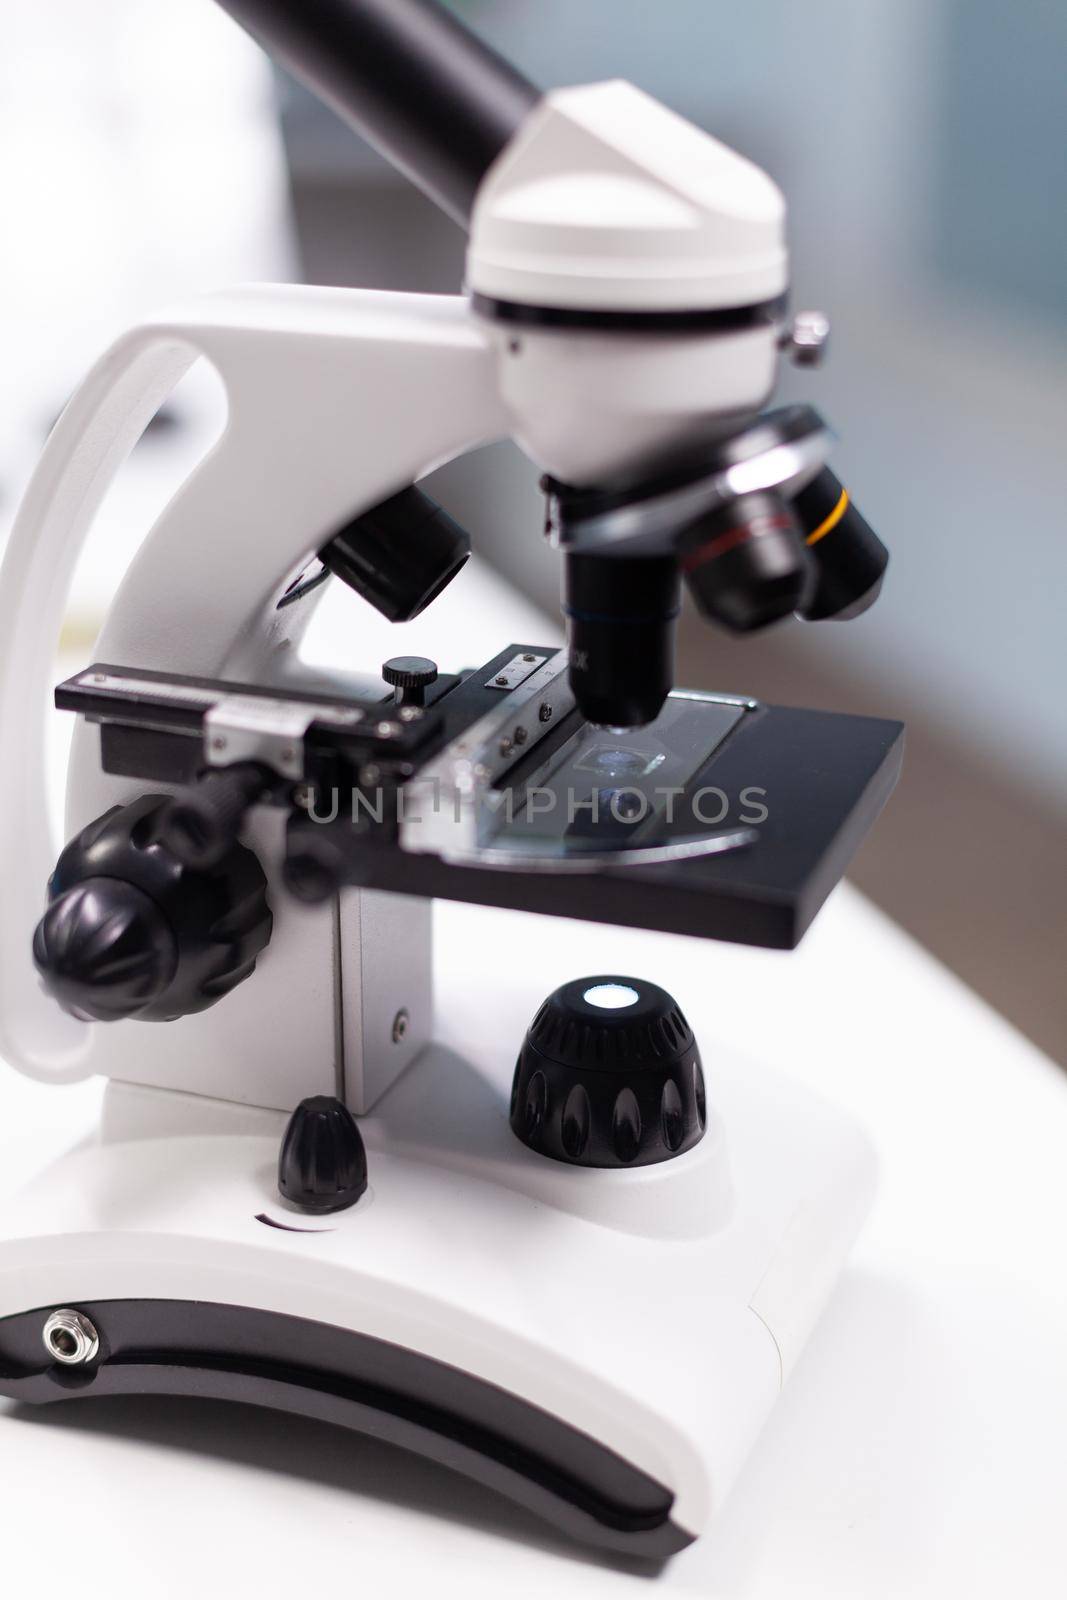 Dna molecular sample under microscope ready for biological virus vaccine investigation by DCStudio